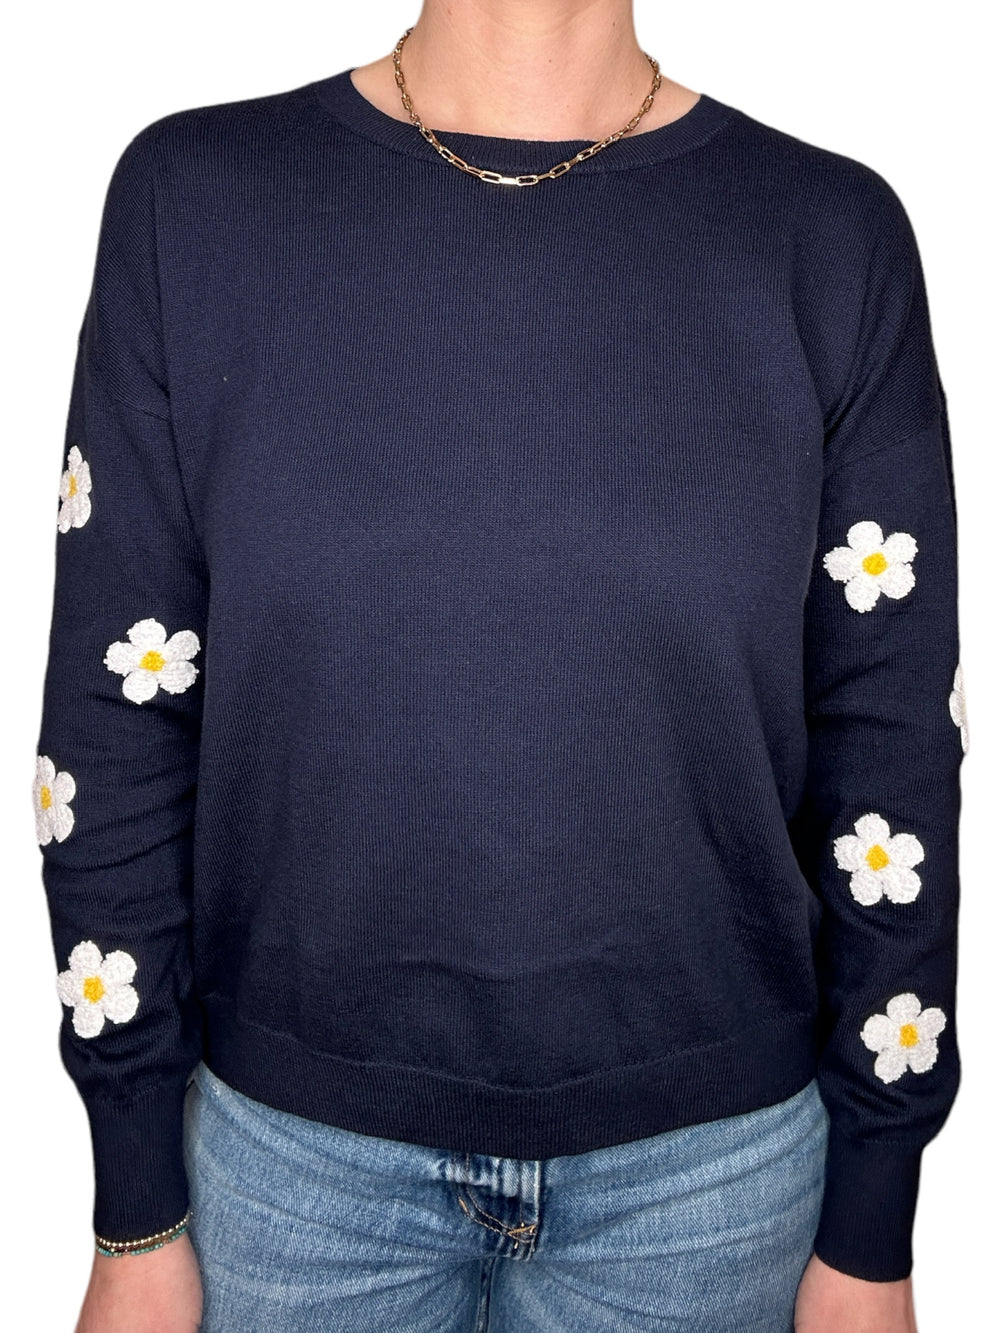 FLOWER SLEEVE SWEATER - NAVY - Kingfisher Road - Online Boutique